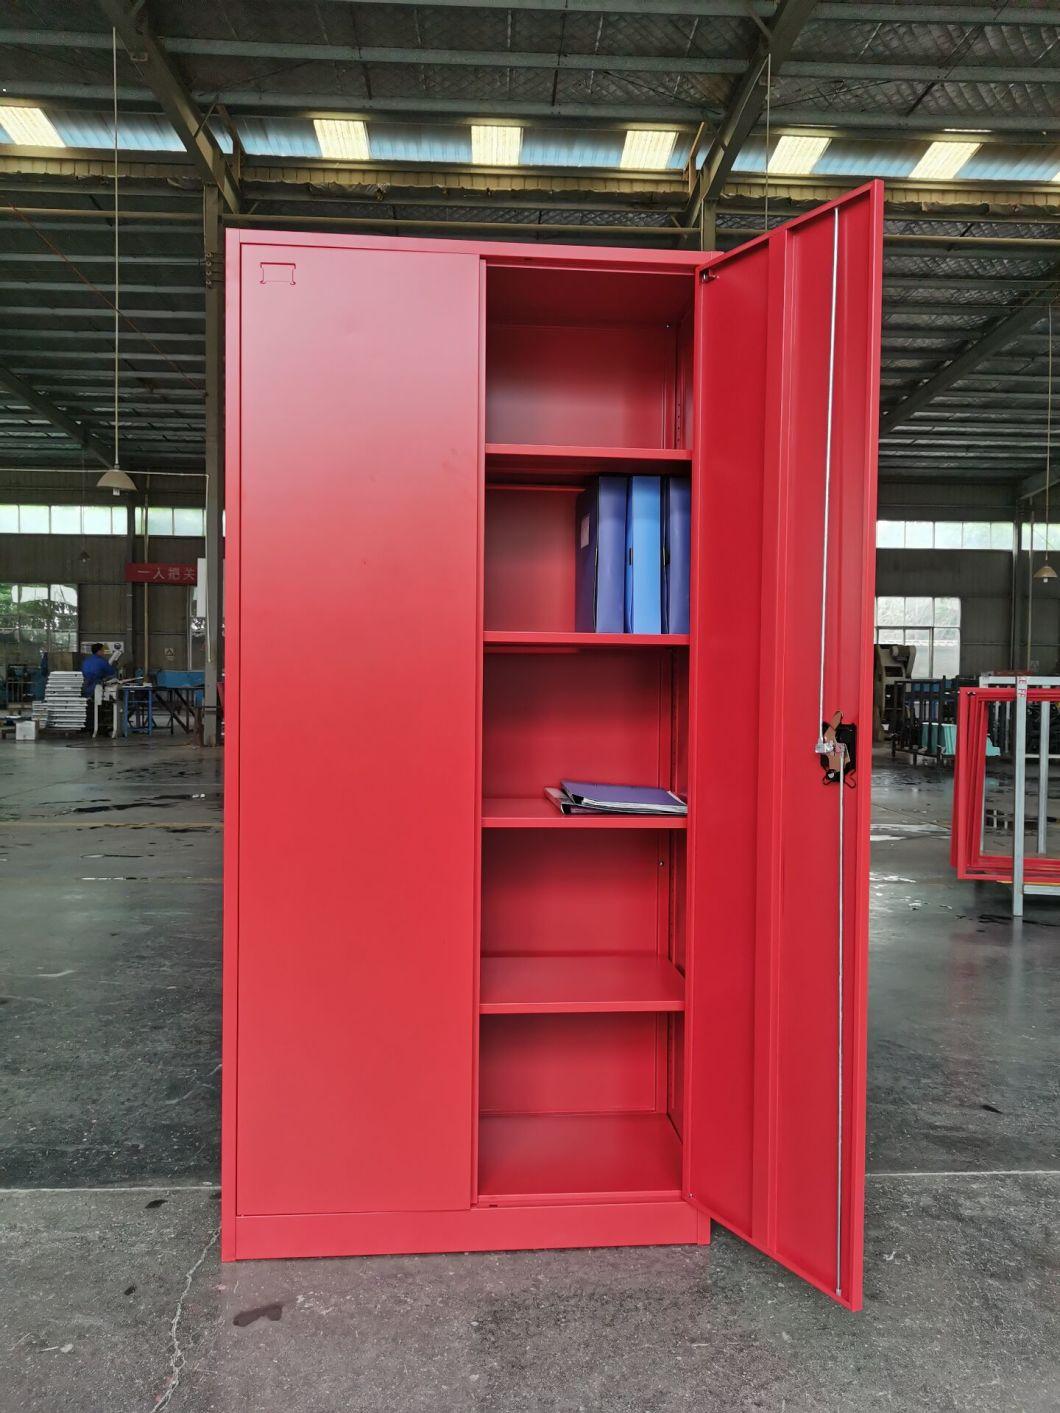 Vertical Tall Metal Filing Cabinets Modern Office Equipment Locking File Document Storage Cabinet